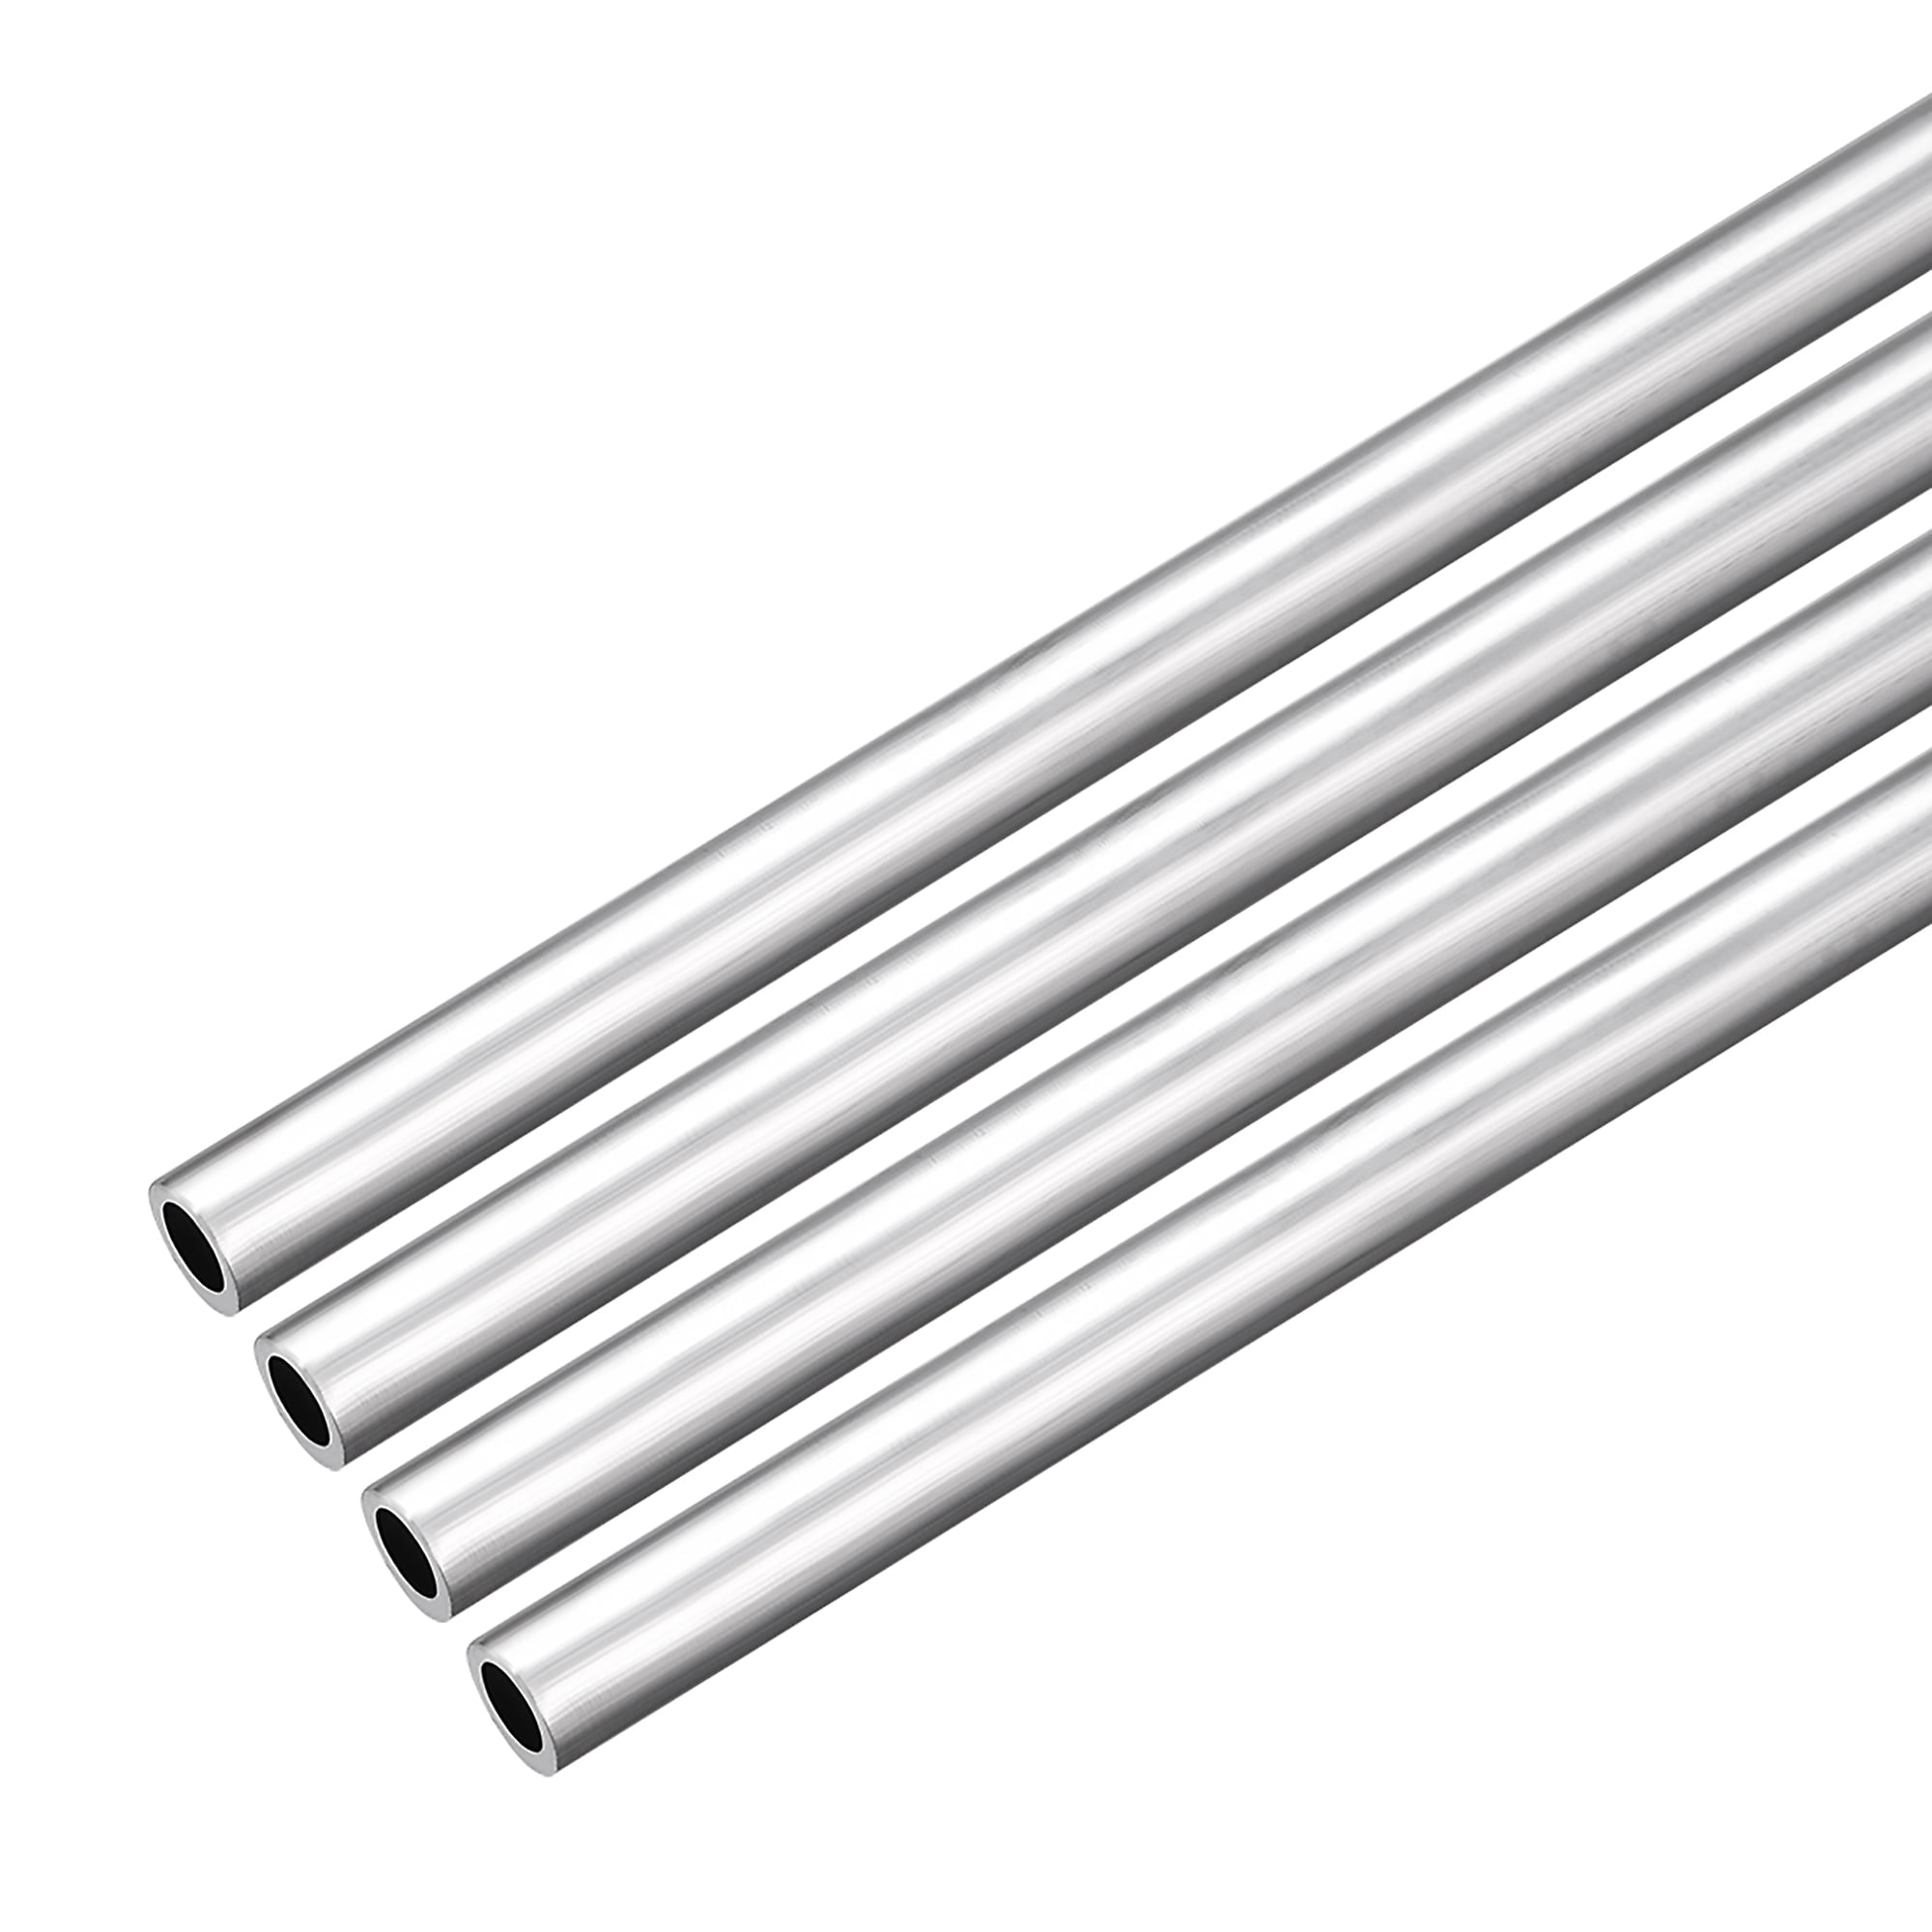 uxcell 304 Stainless Steel Capillary Tube Tubing 7.5mm ID 9.5mm OD 300mm Length 1mm Wall 